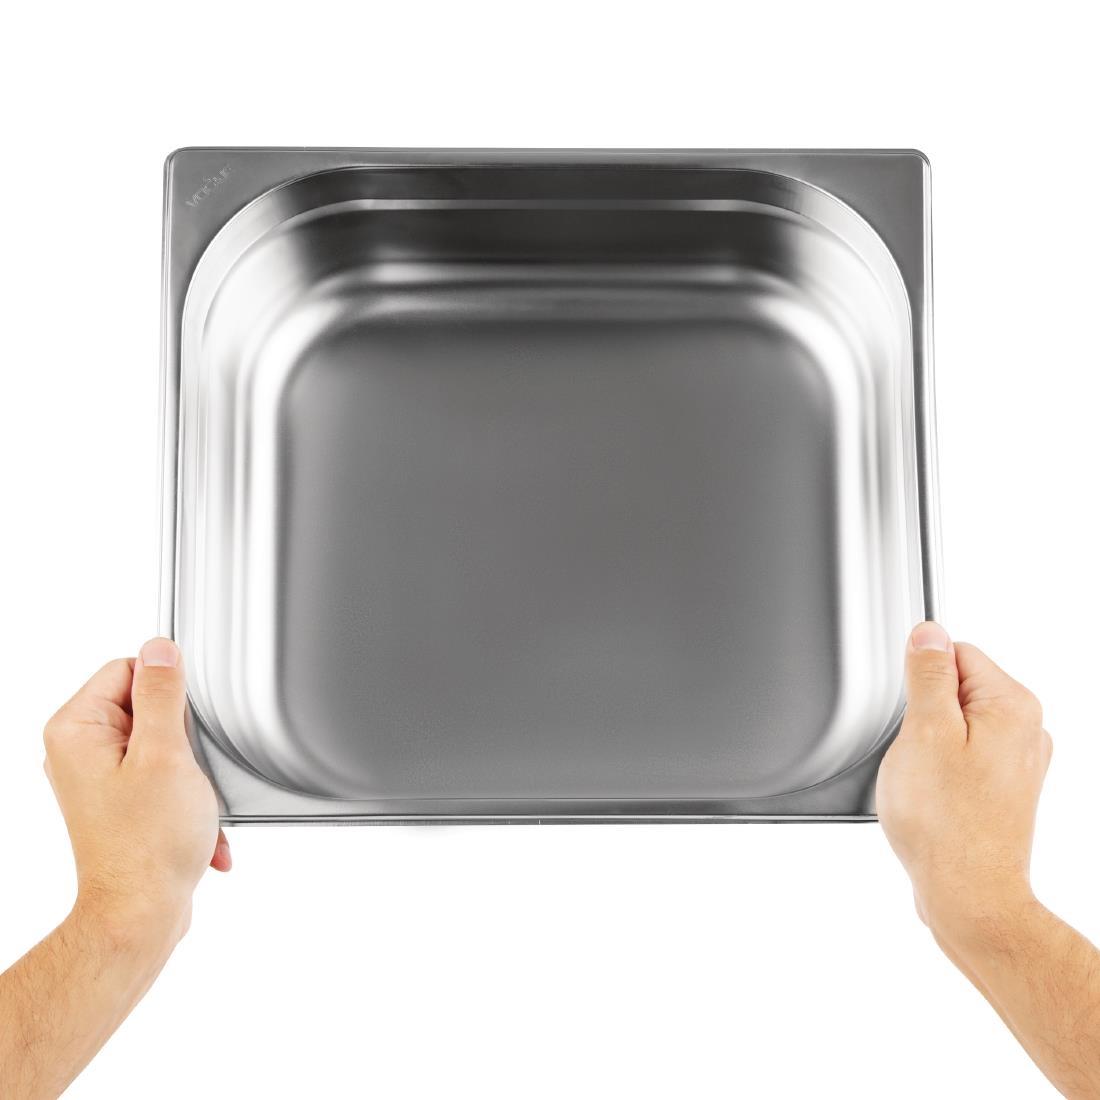 Vogue Stainless Steel 2/3 Gastronorm Pan 100mm - K812  - 4